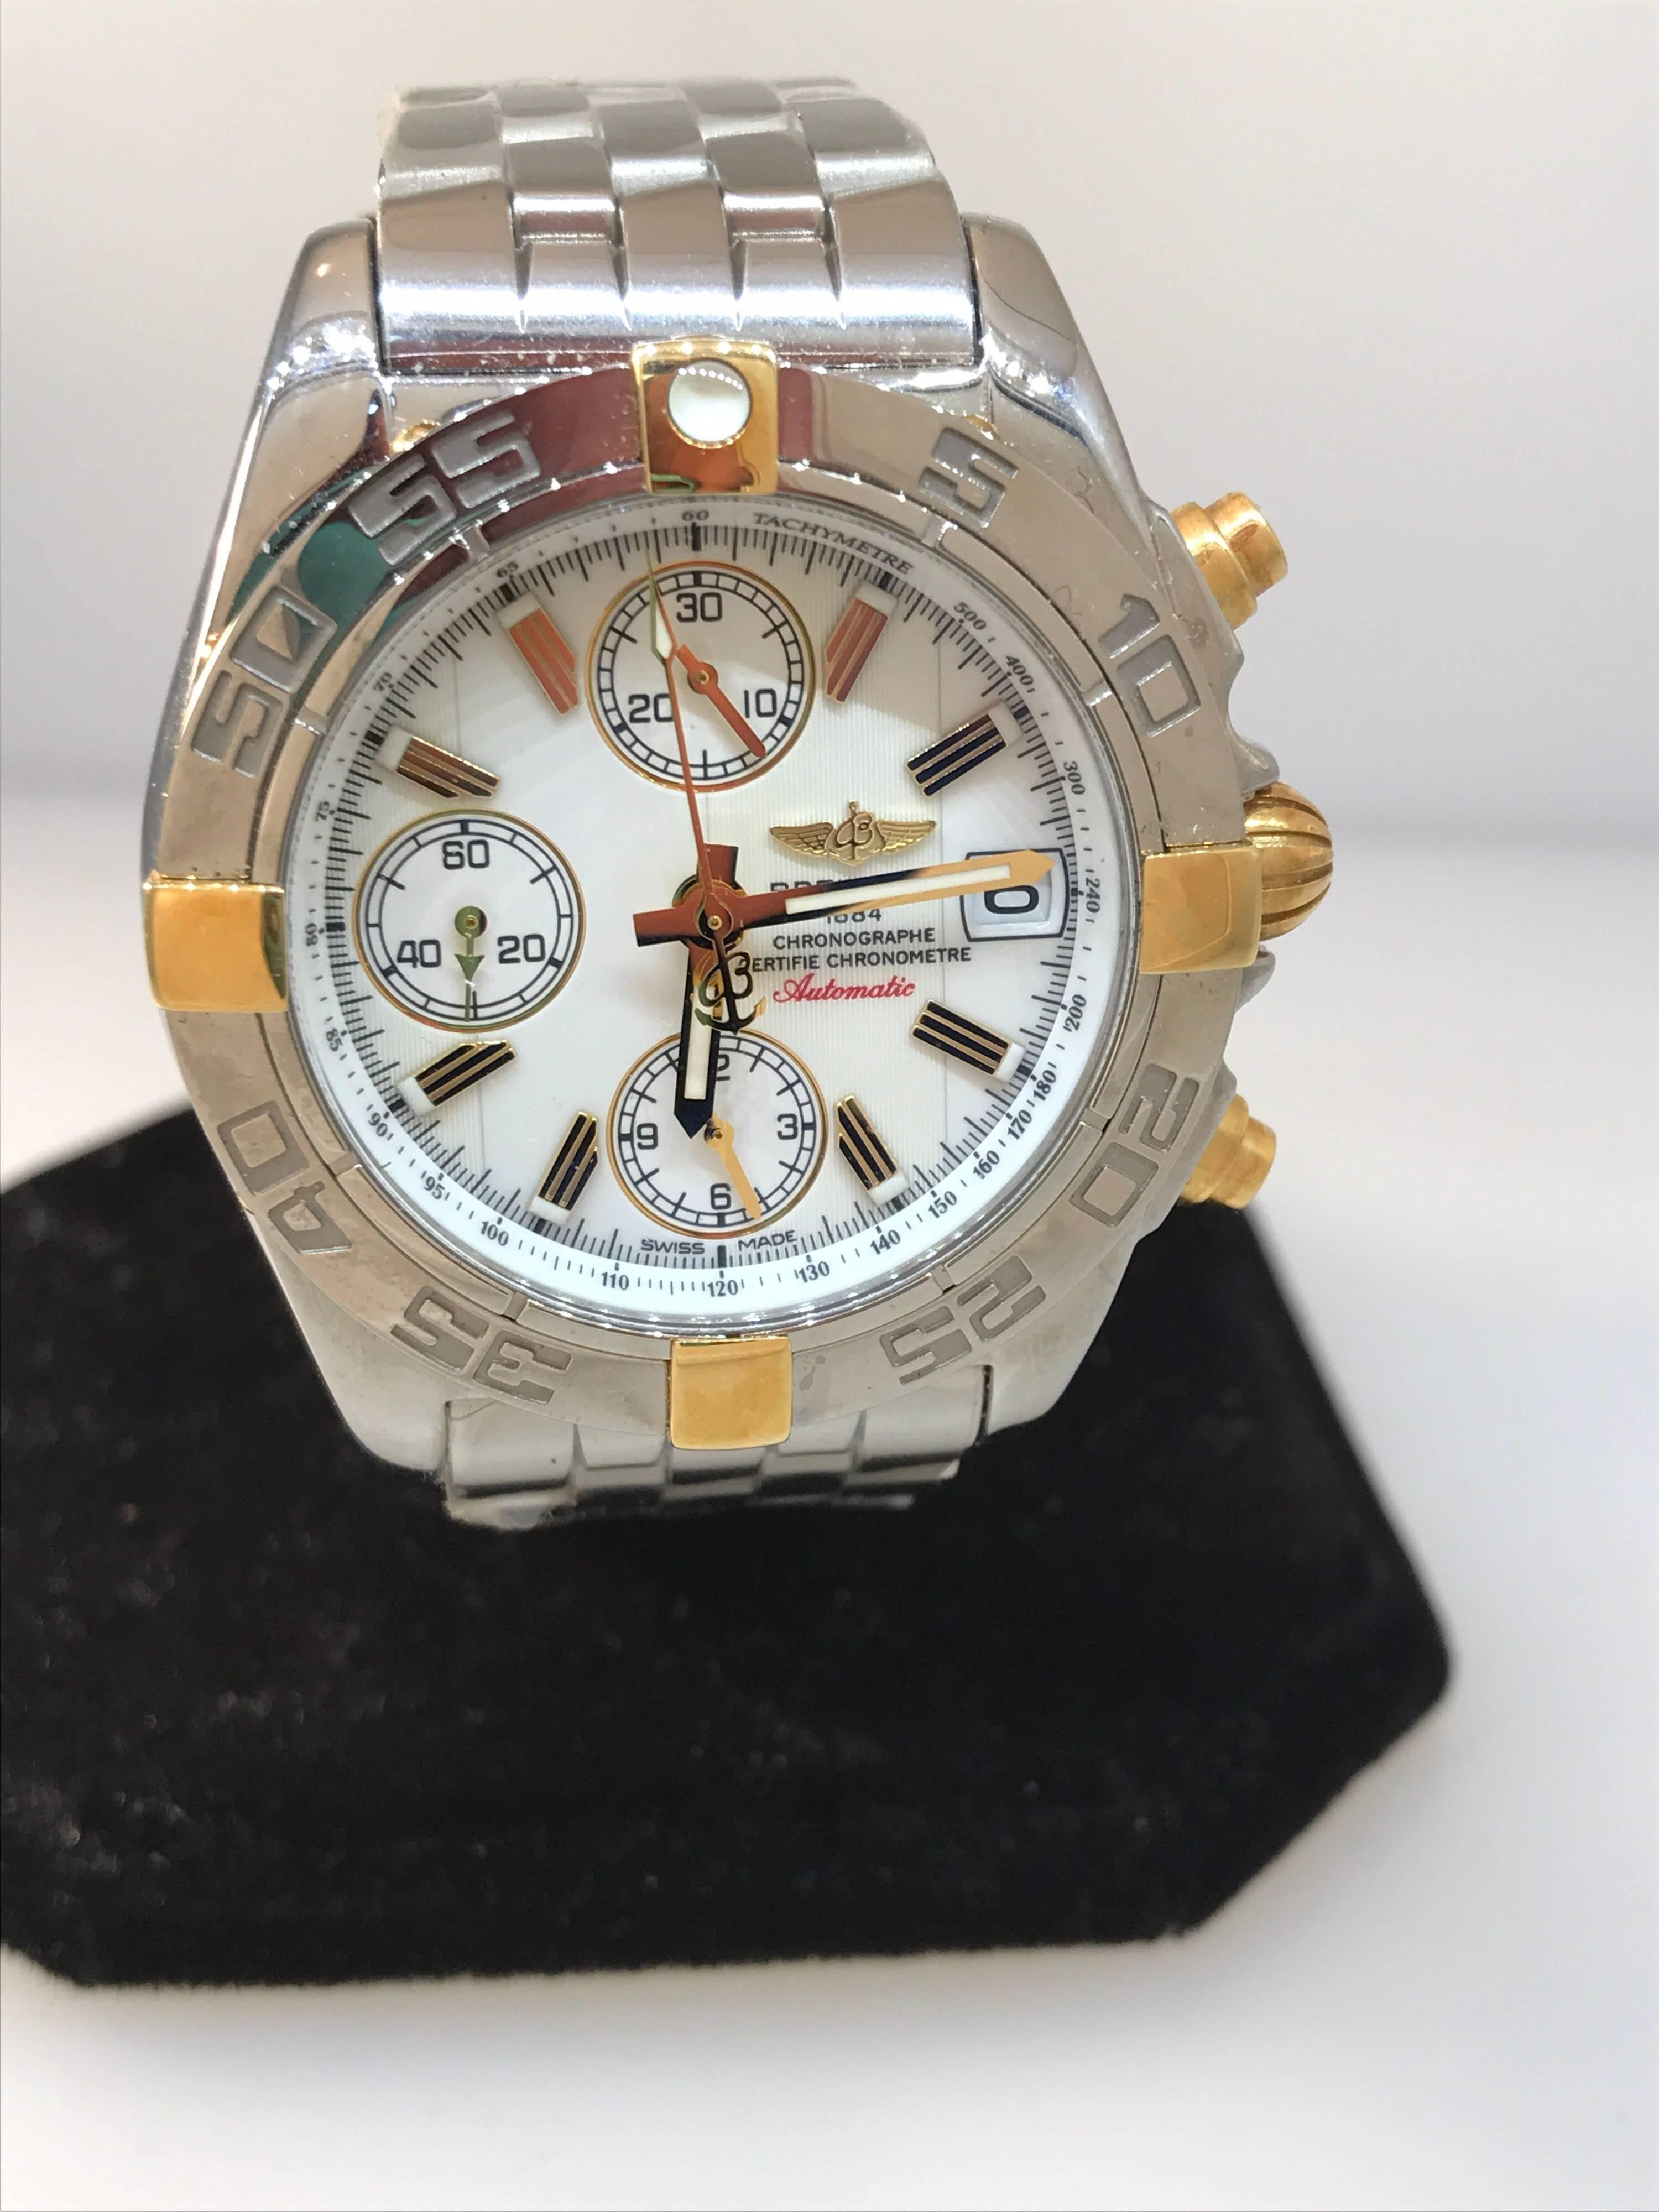 Breitling Chrono Galactic Men's Watch

Model Number: B13358L2/A700

100% Authentic

Brand New

Comes with original Breitling box, warranty and instruction manual

Stainless Steel & 18 Karat Yellow Gold Case

White dial & Subdials

Gold Tone Index